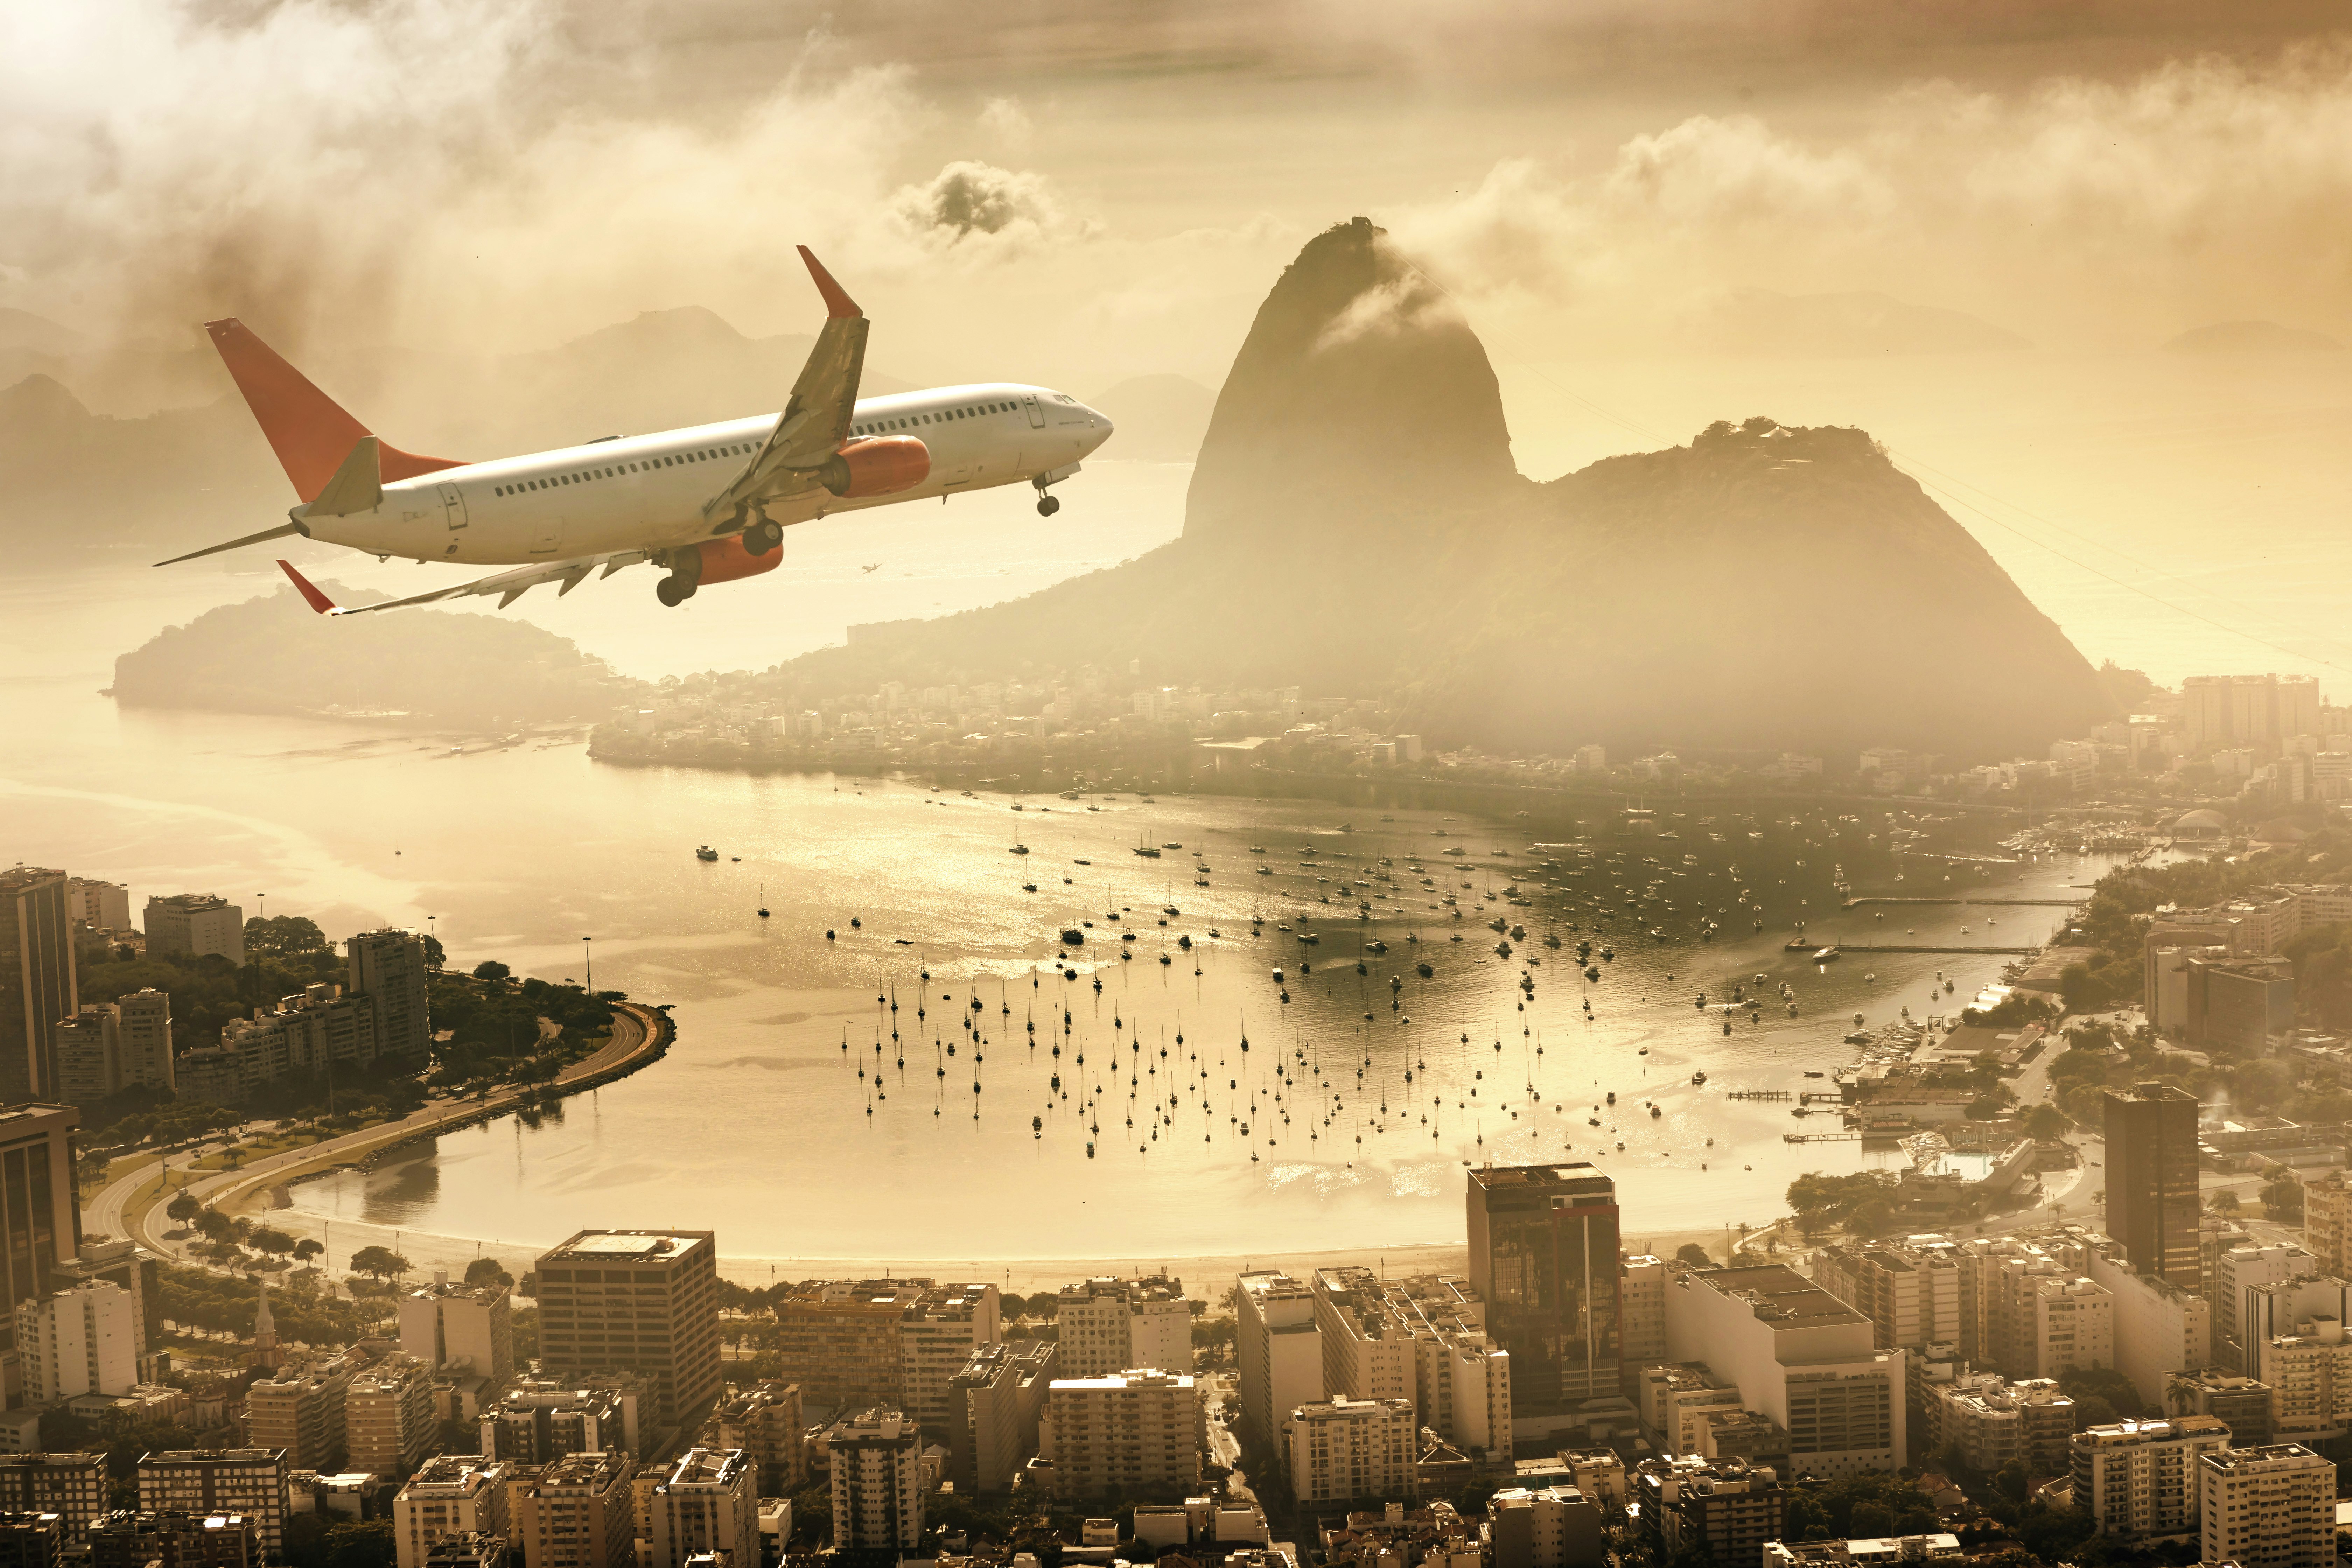 A plane turns towards Rio de Janeiro with the golden hour landscape of Guanabara Bay and Sugarloaf Mountain in the background